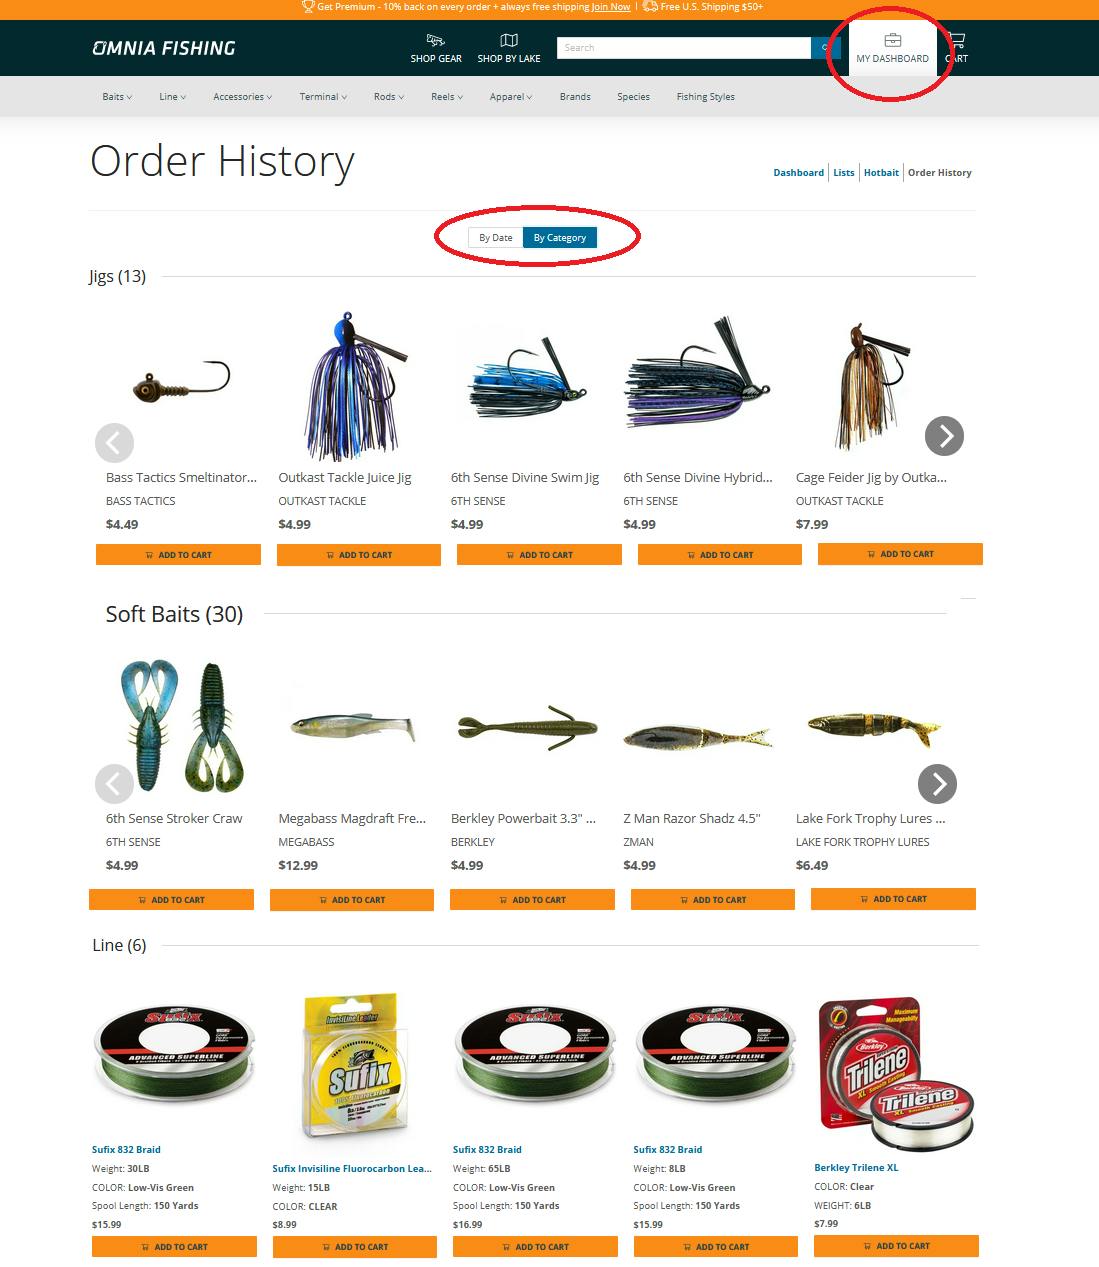 Order History: View By Category